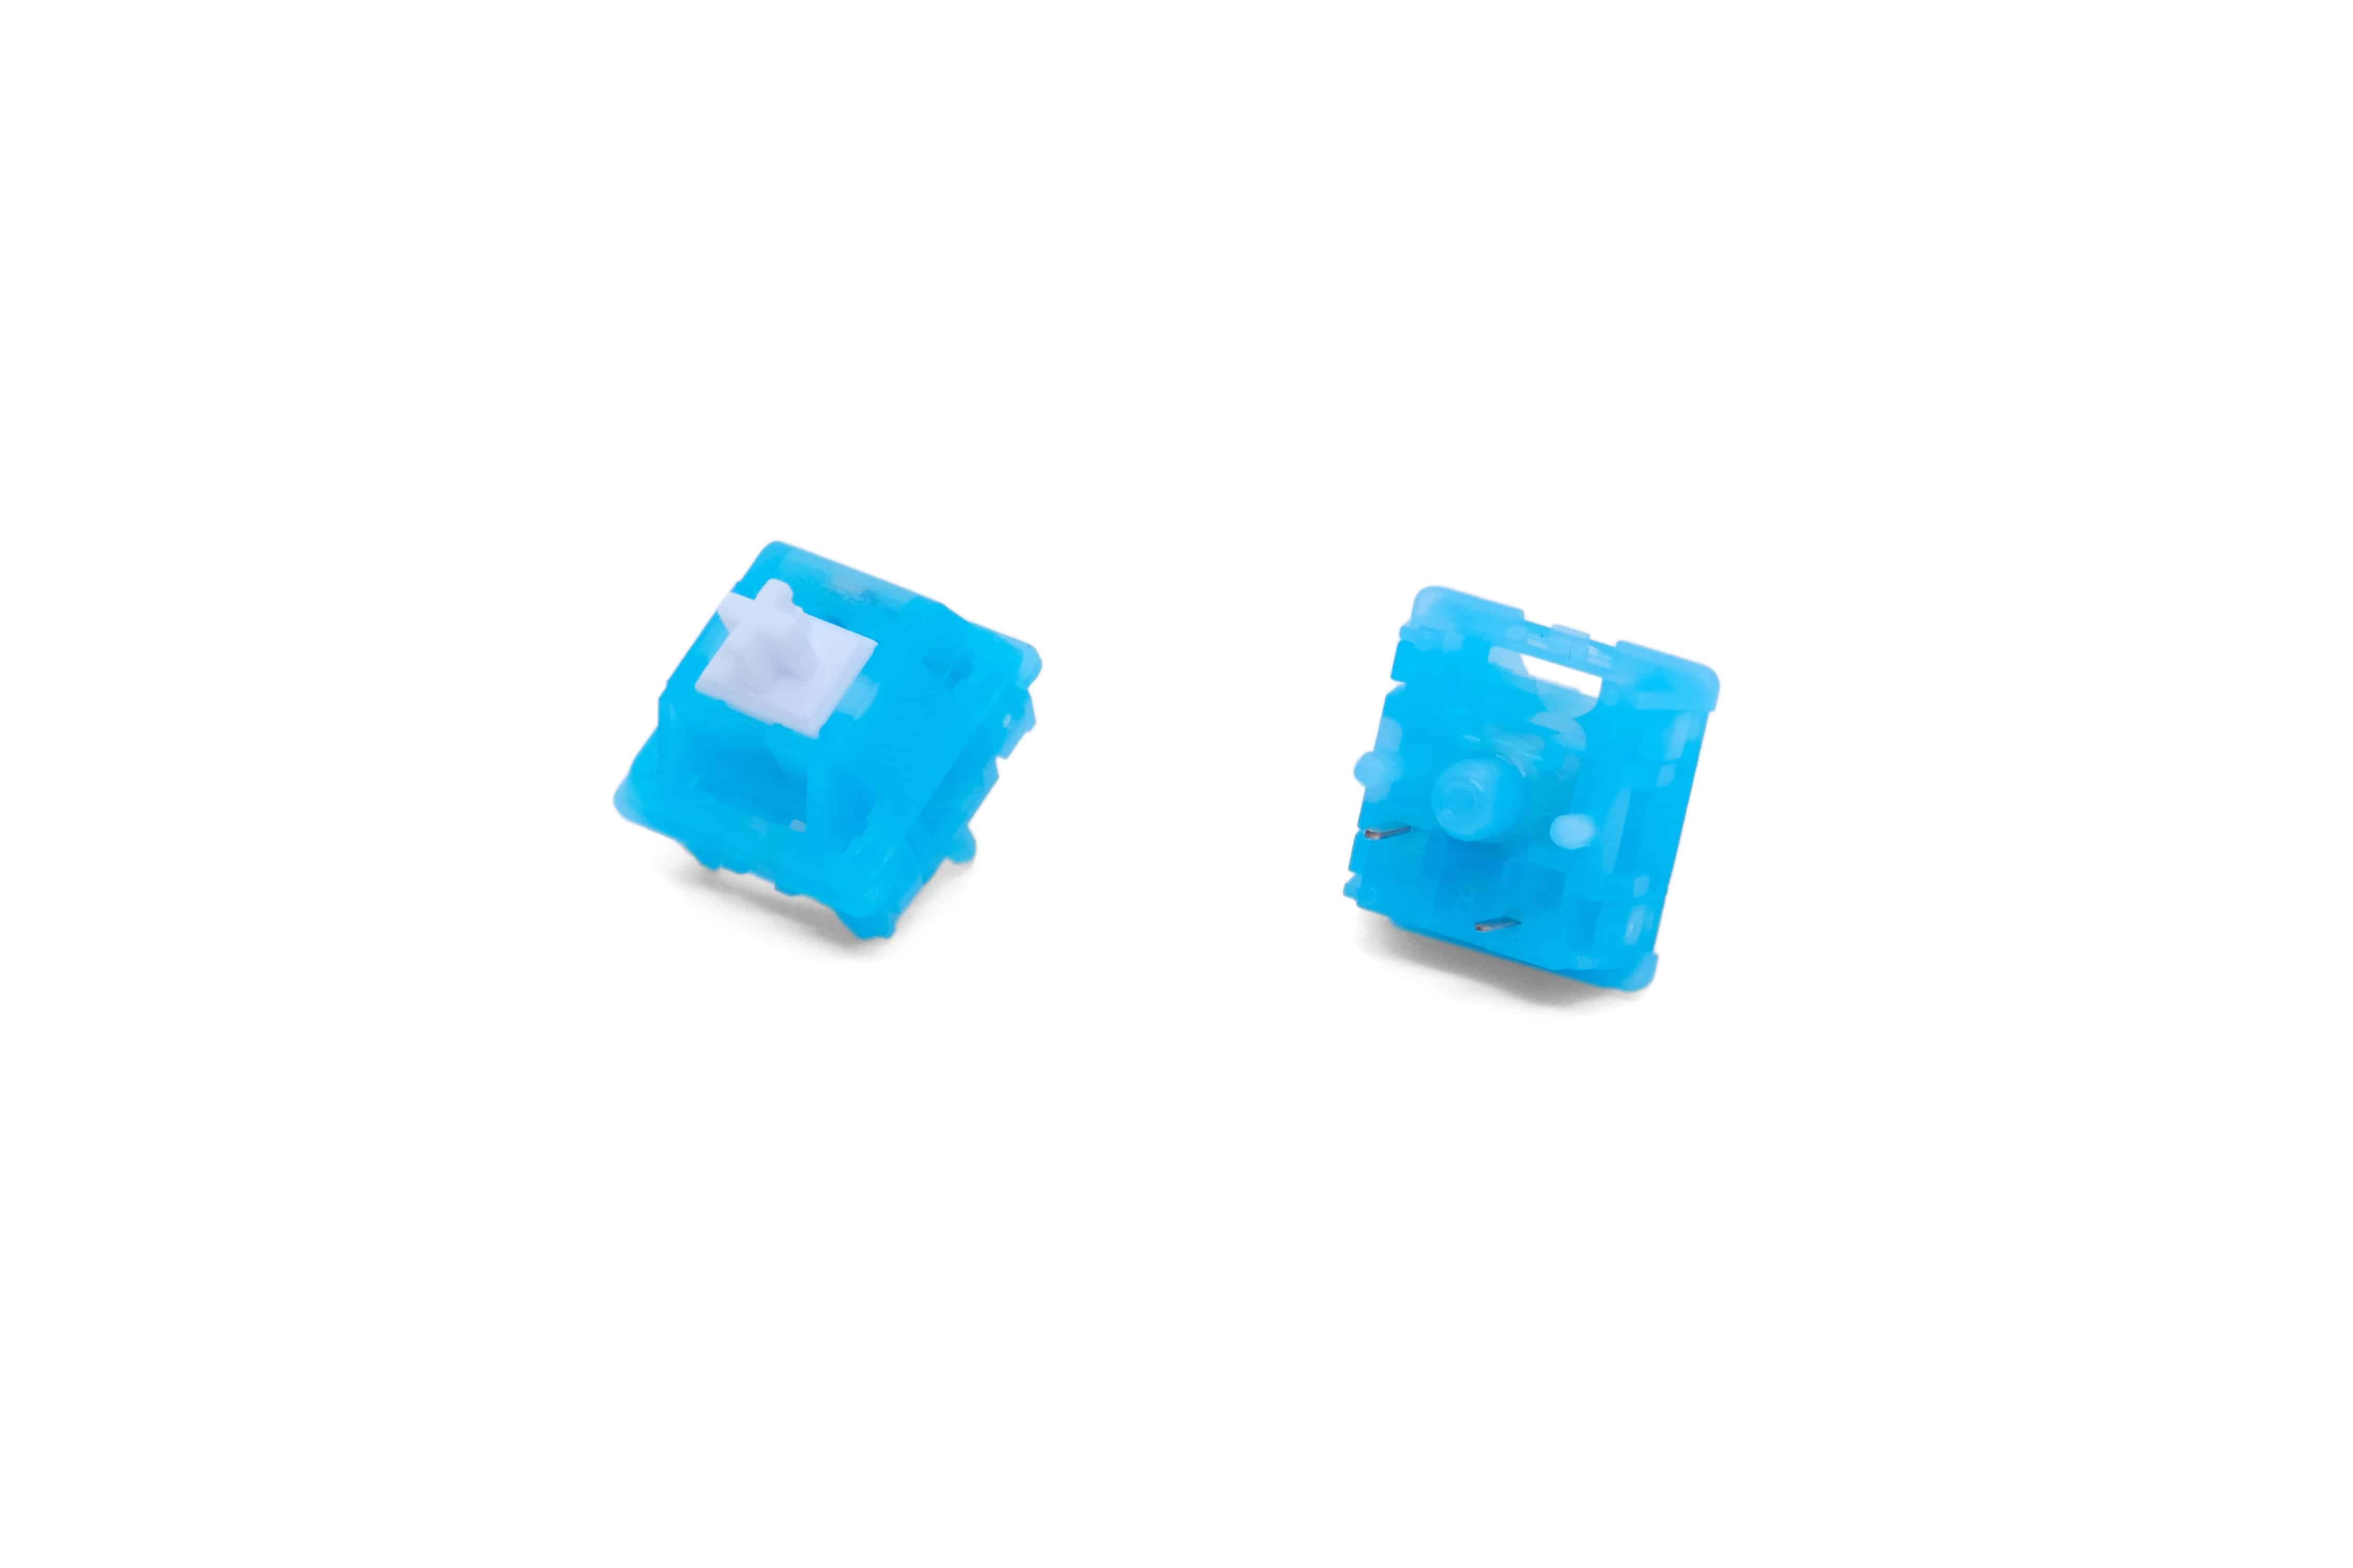 Tecsee Blue Sky Cloud Tactile Switches at KeebsForAll